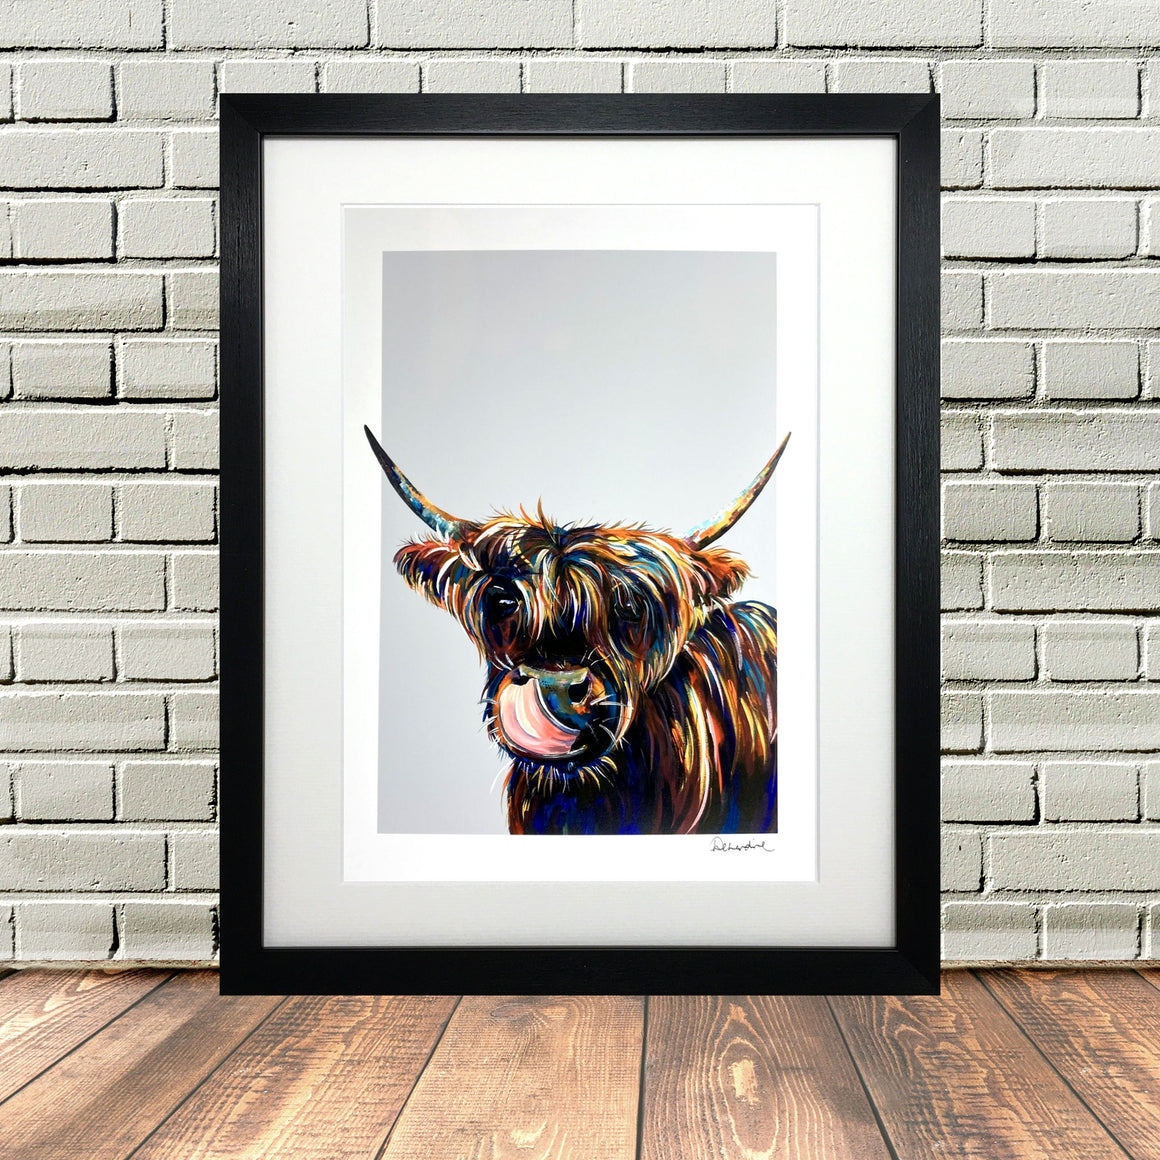 Highland Cow Picture Print White Frame